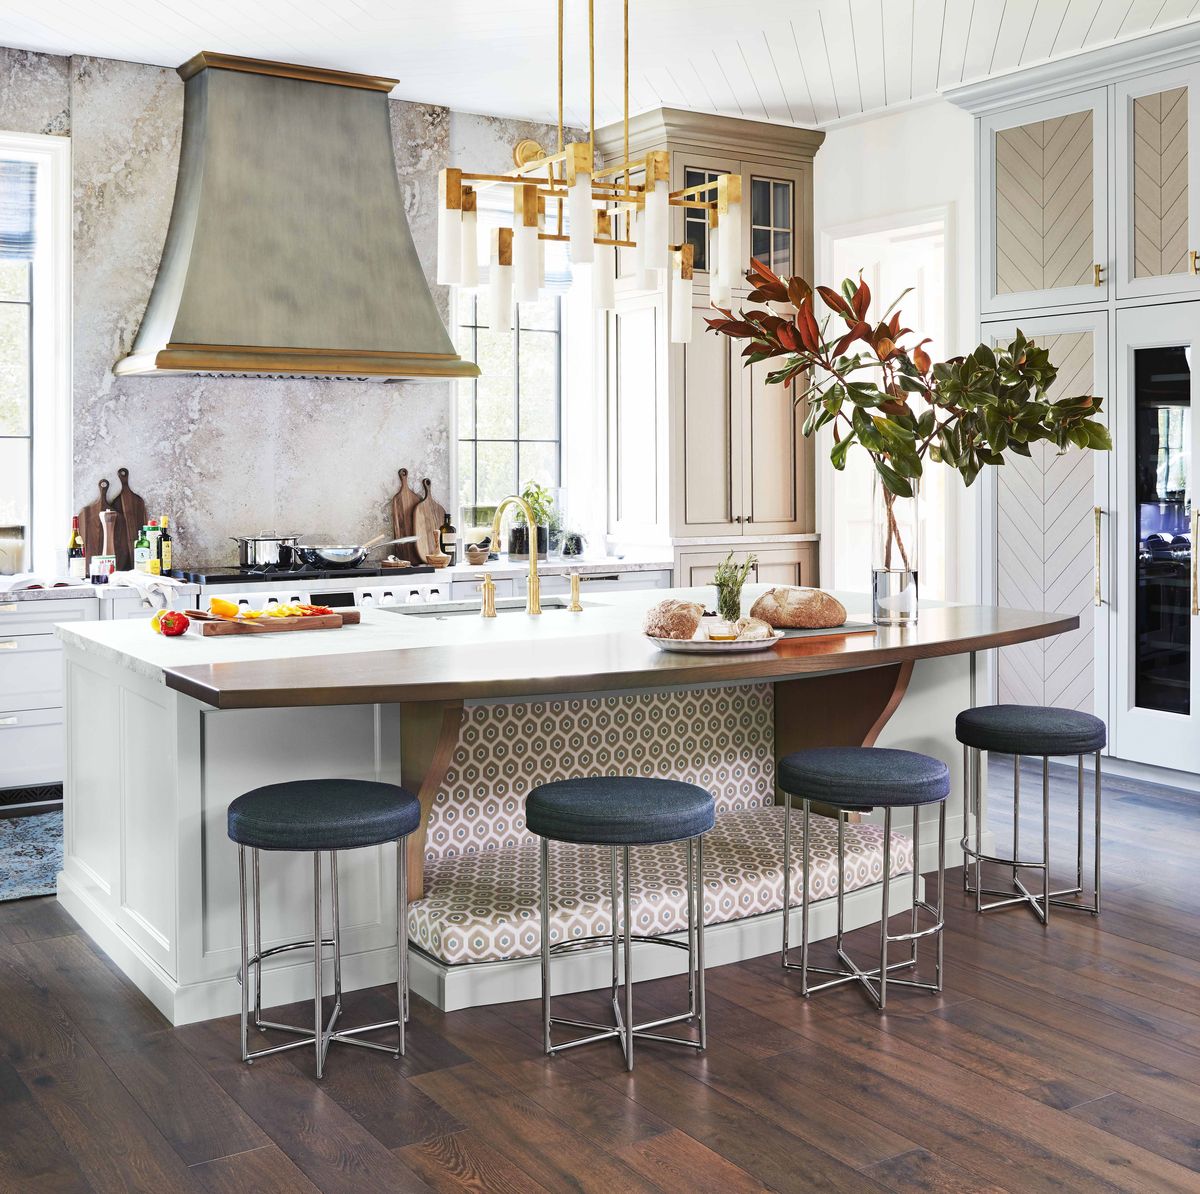 15 of the Most Beautiful Kitchens - Willow Bloom Home